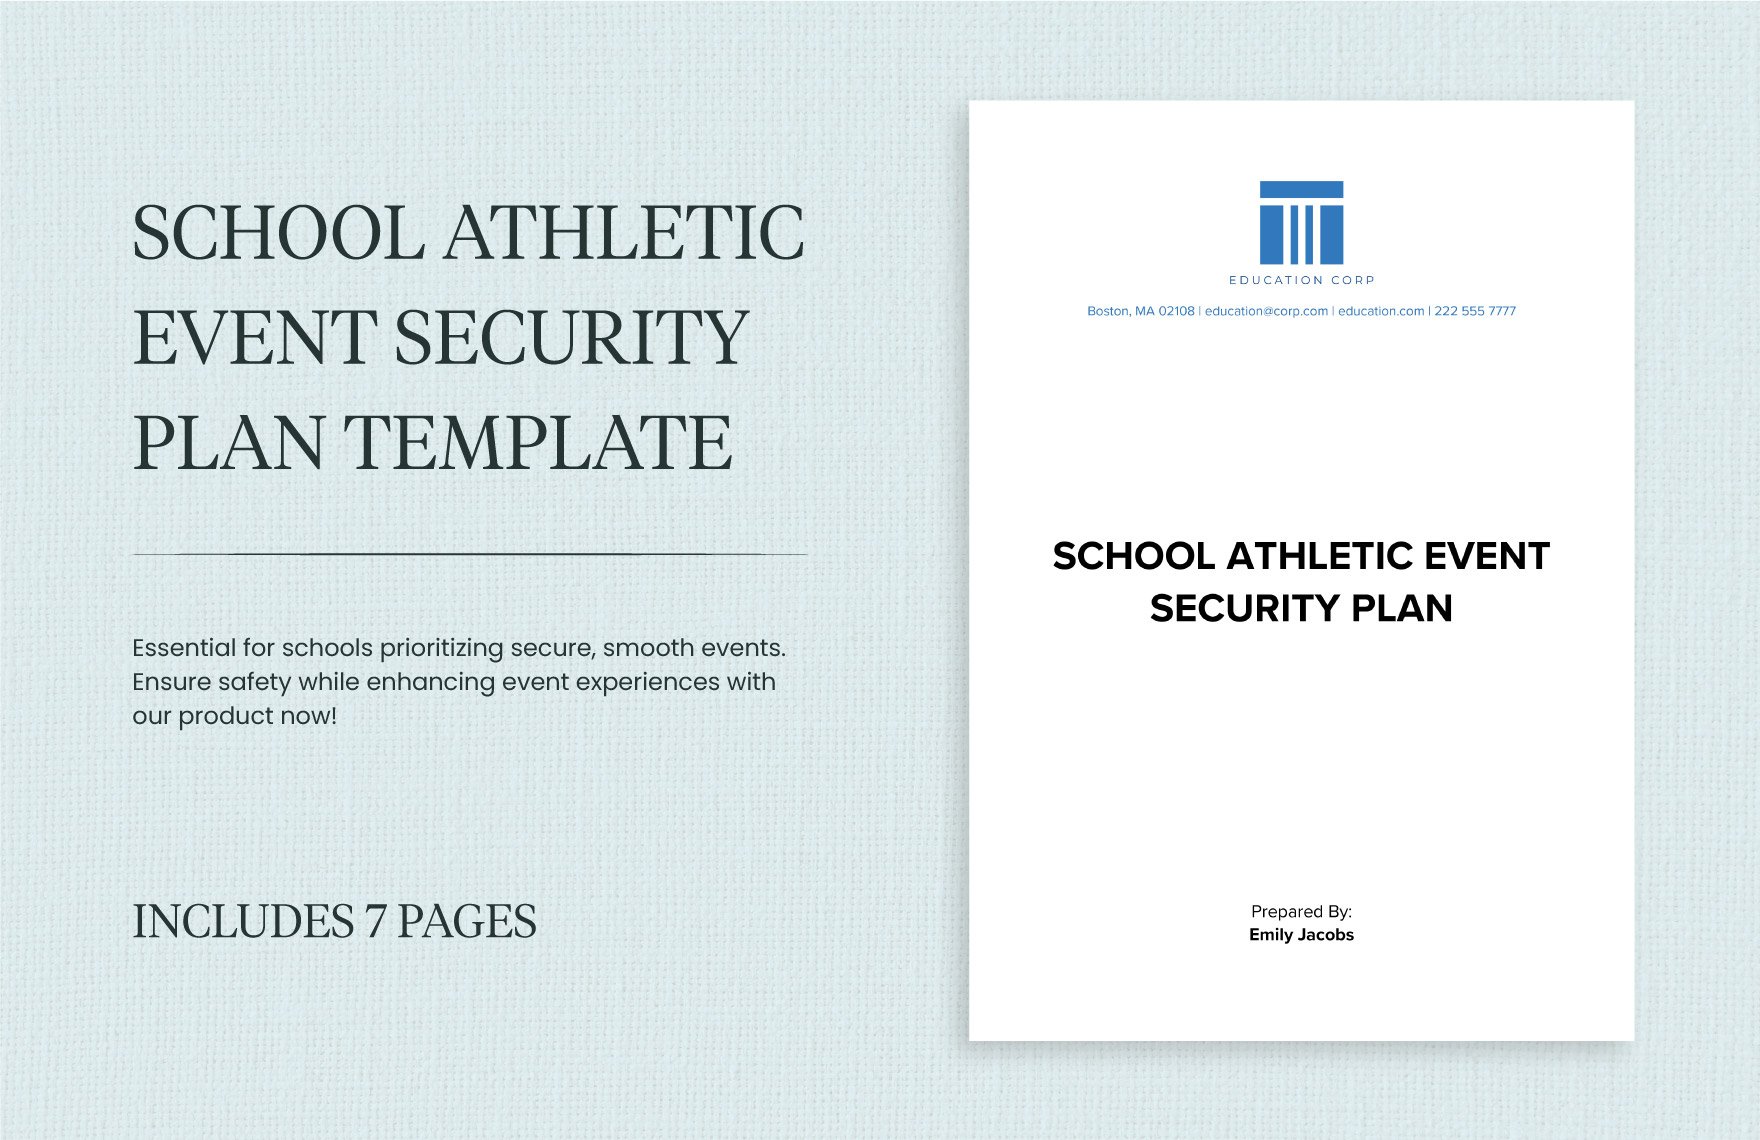 School Athletic Event Security Plan Template in Word, Google Docs, PDF